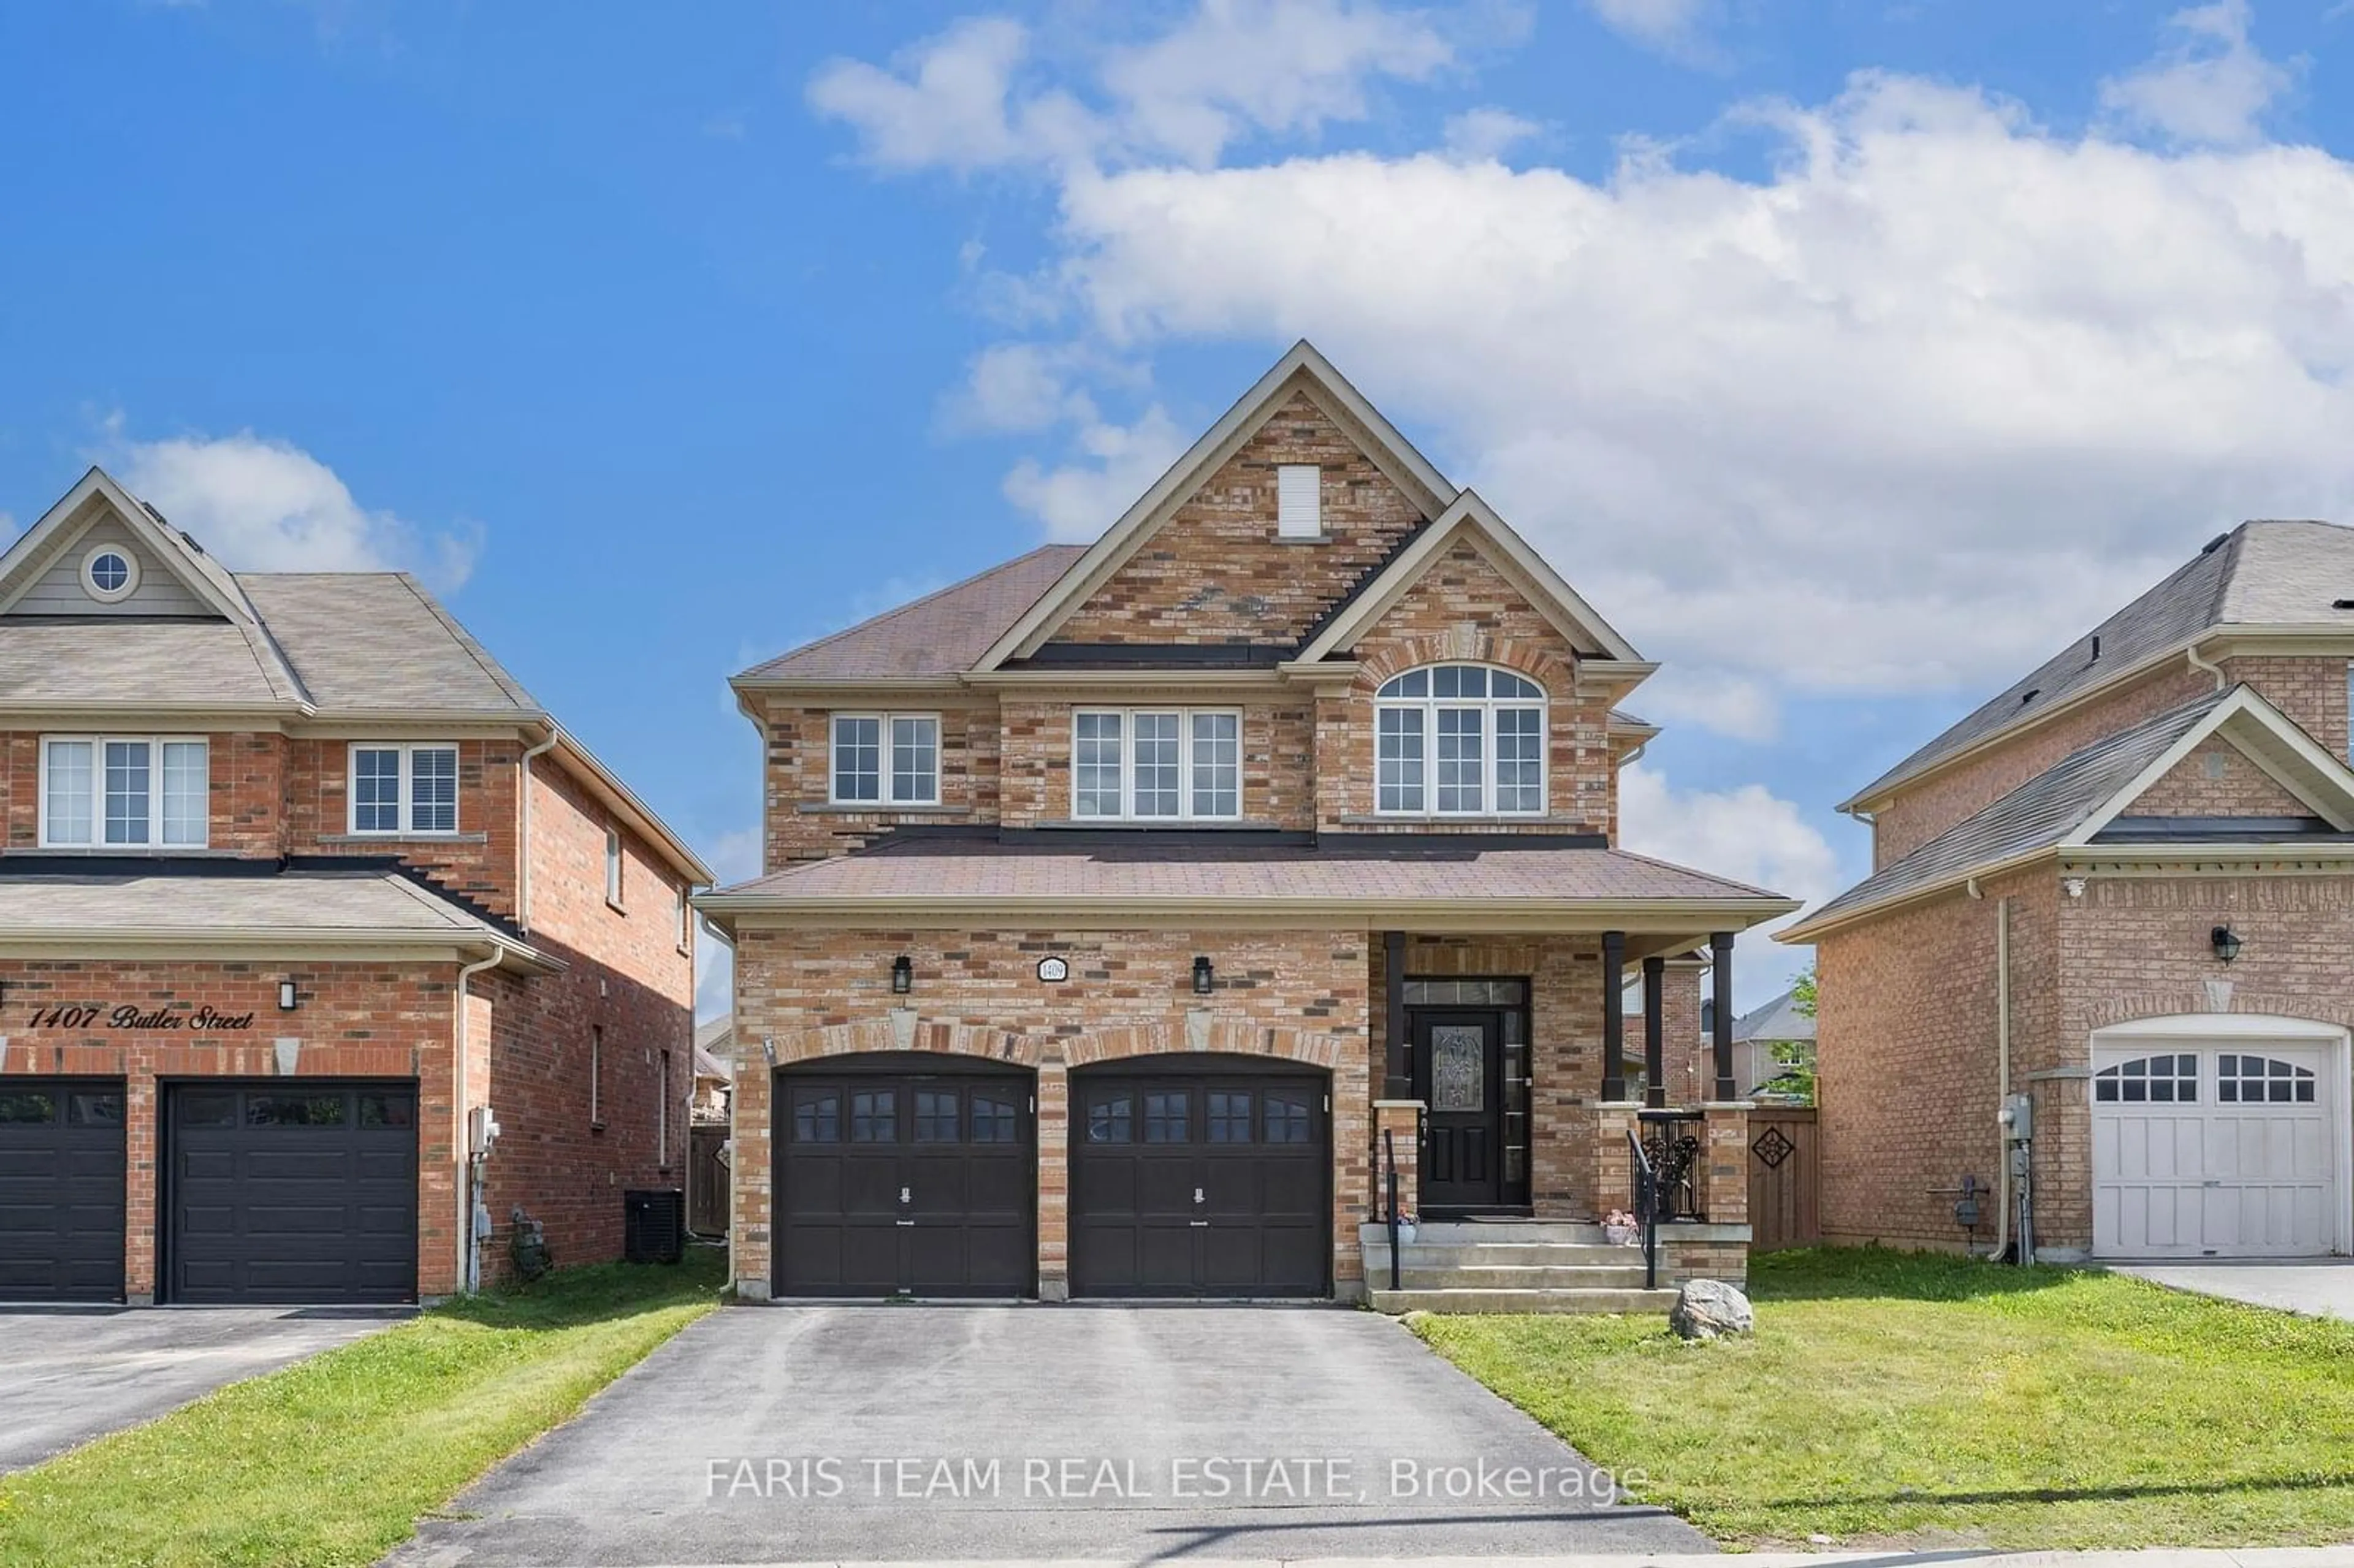 Home with brick exterior material for 1409 Butler St, Innisfil Ontario L9S 0H3